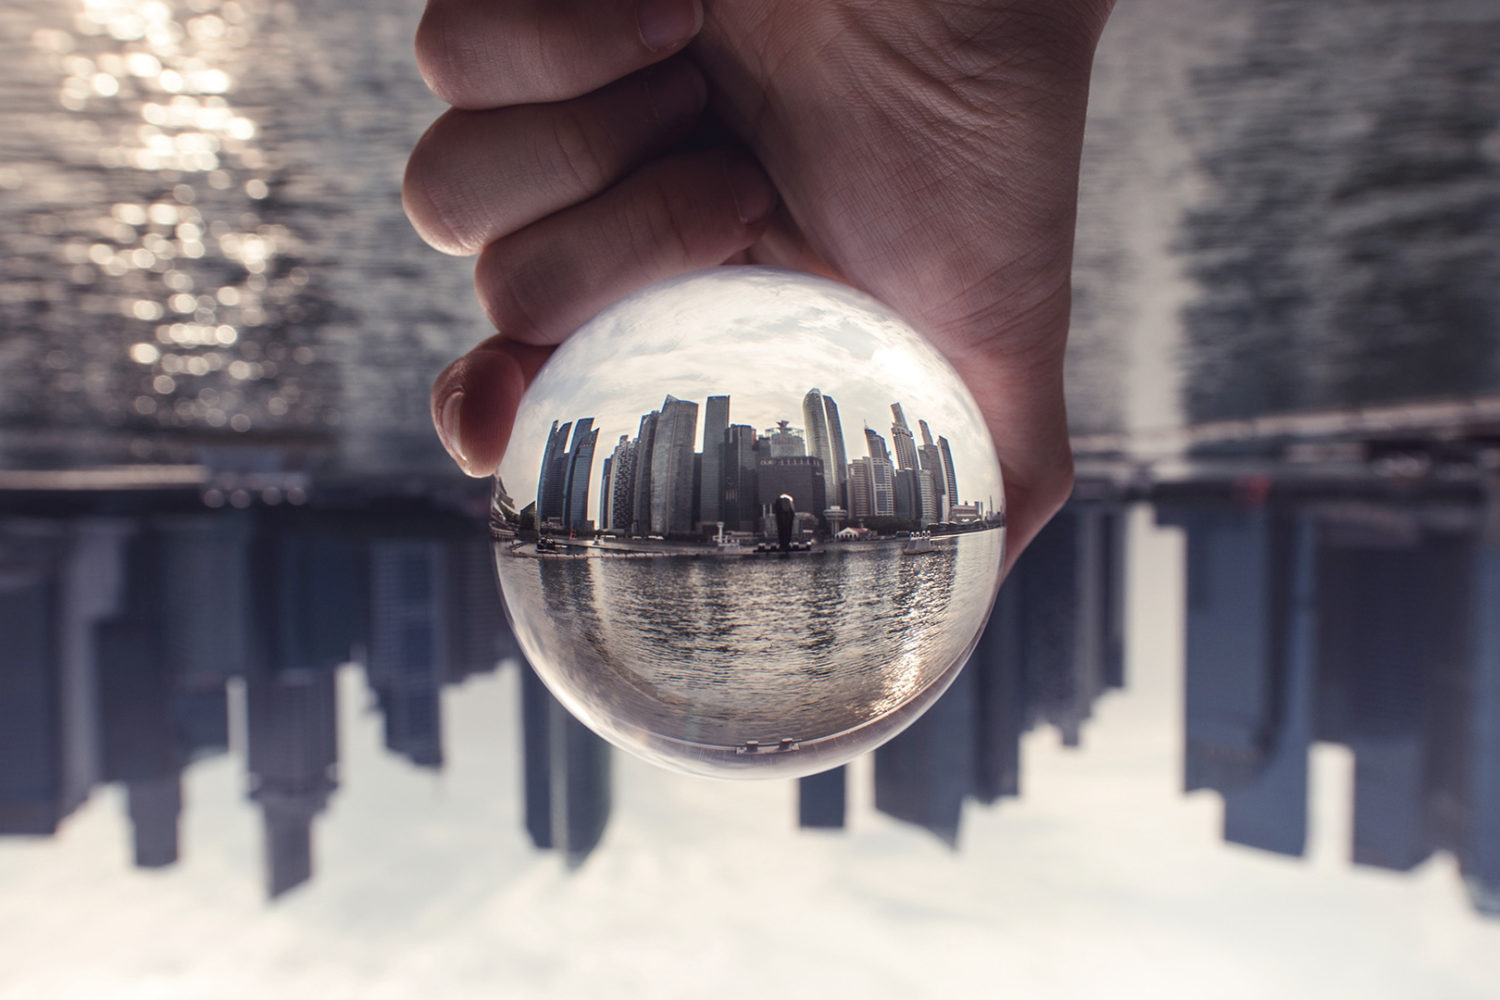 Here's how to get that creative crystal ball effect in your photography